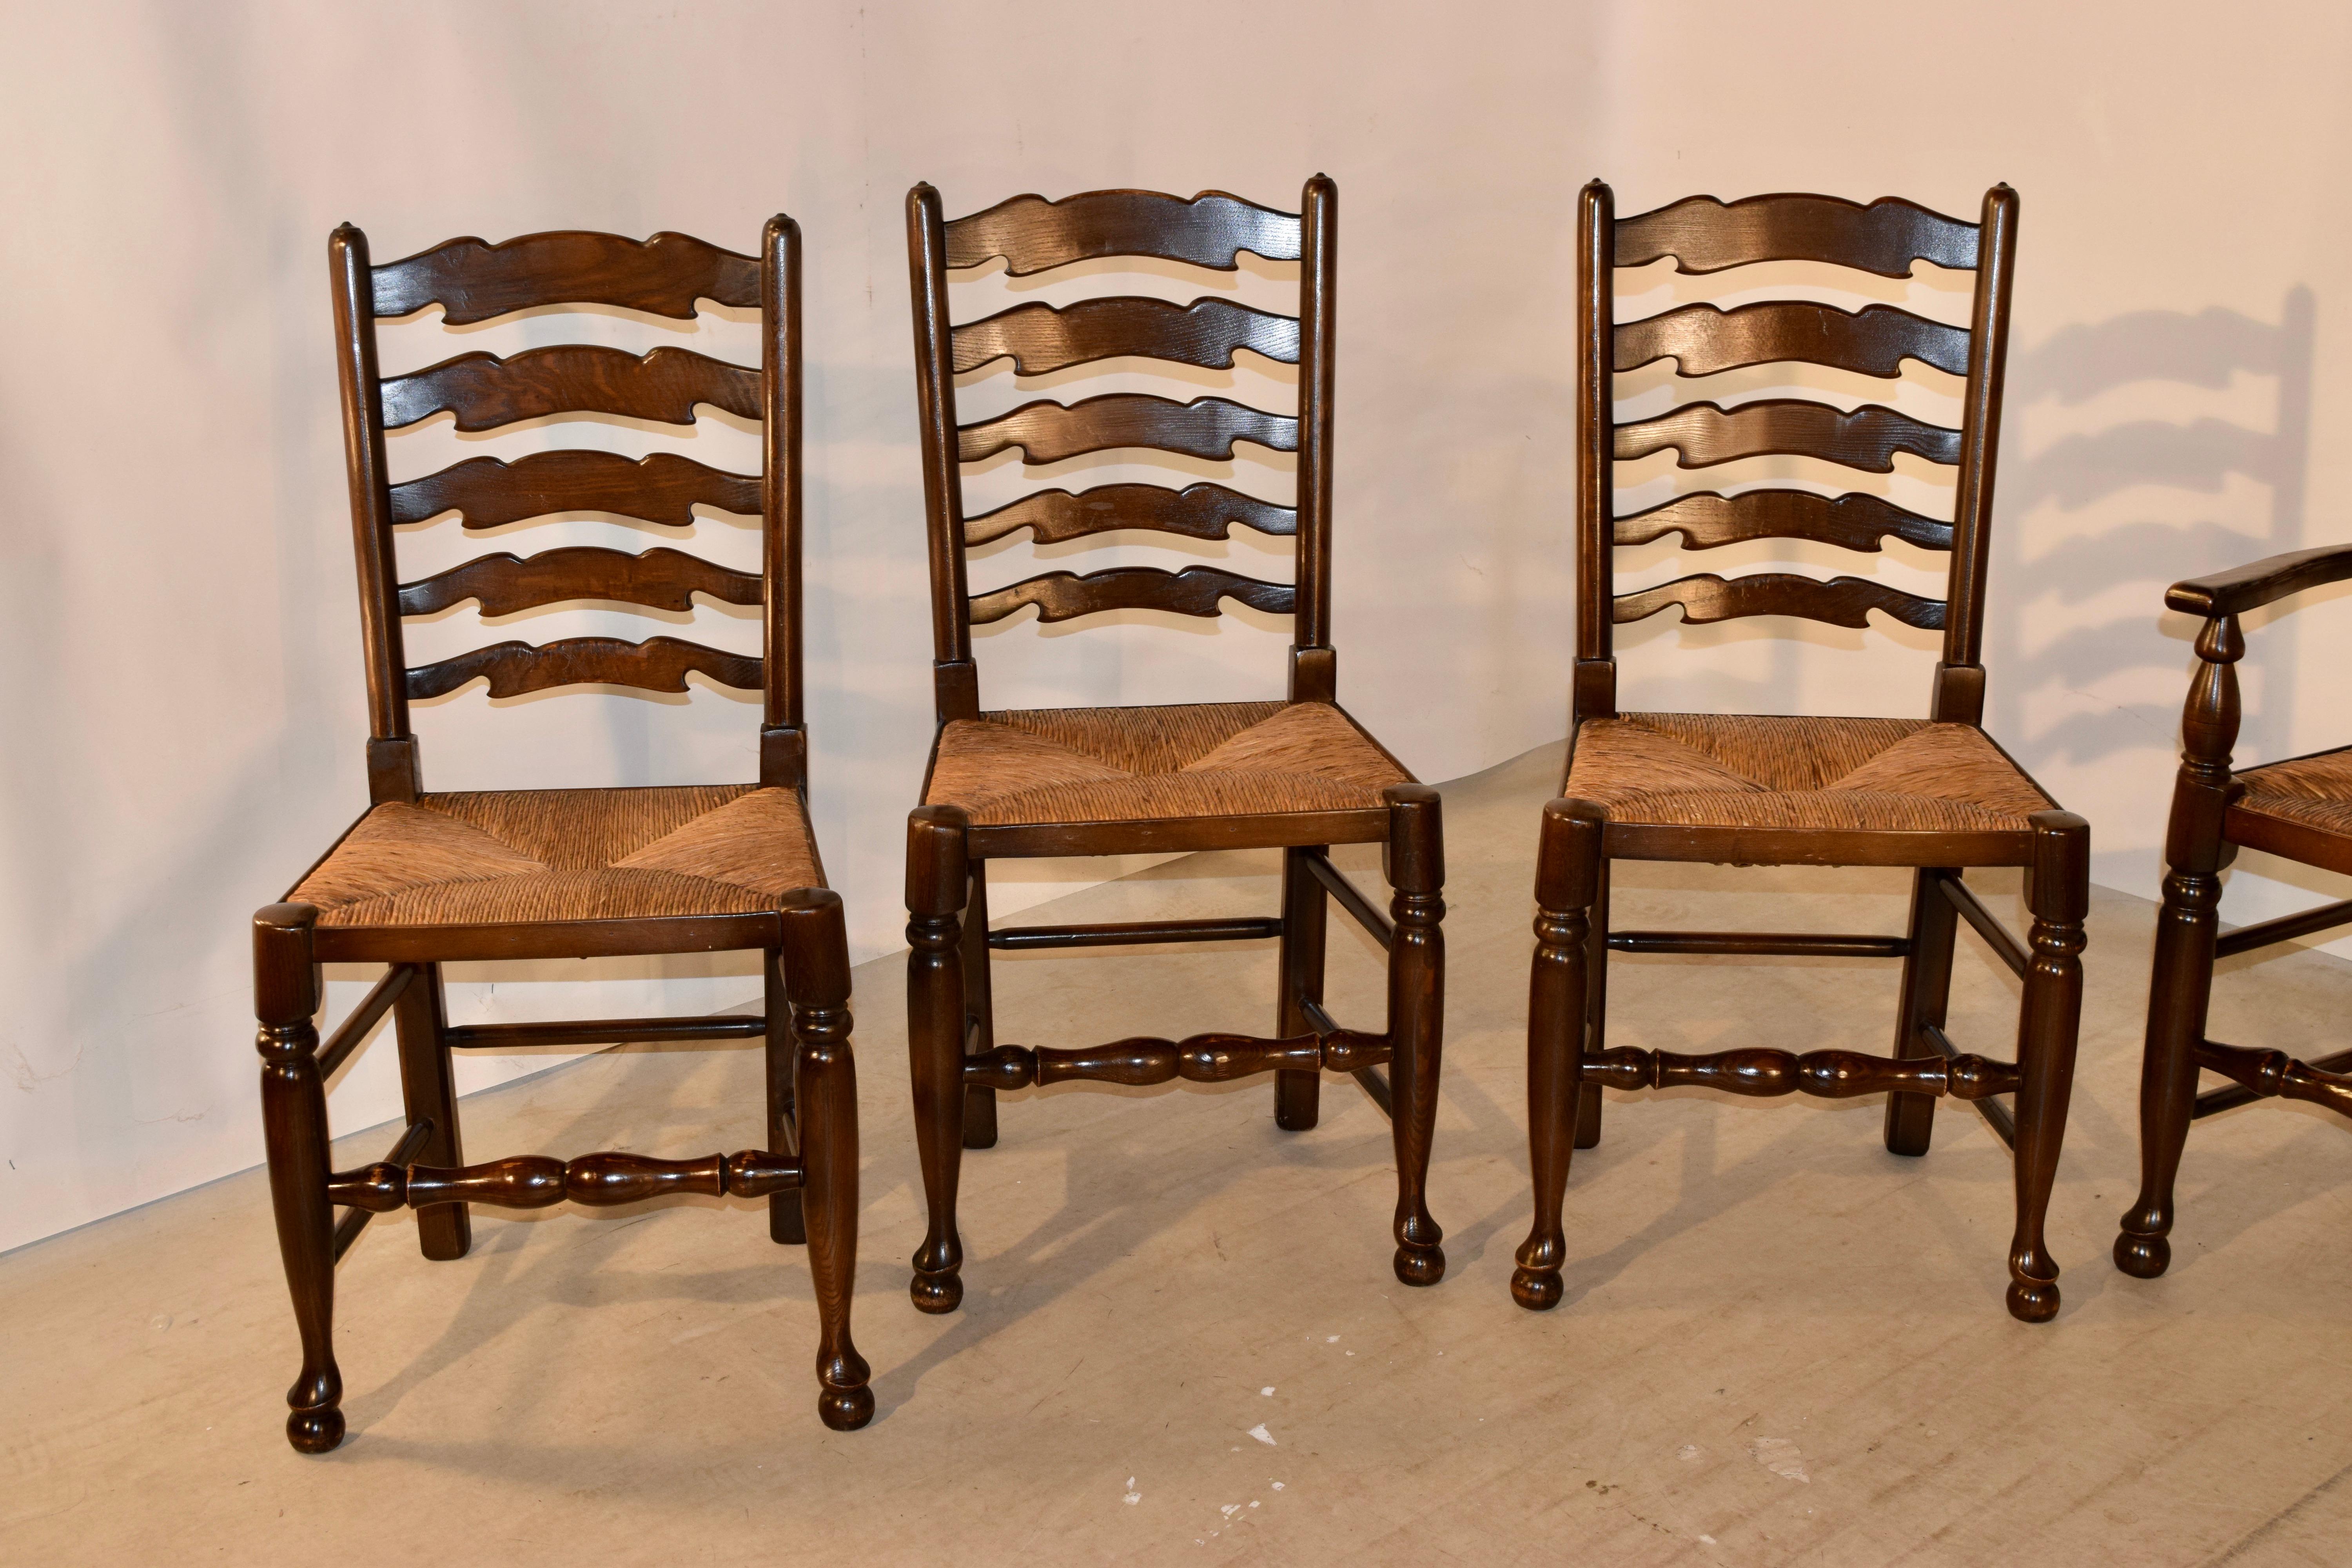 Set of eight oak ladder back chairs from England with woven rush seats, circa 1960-1970. There are two armchairs and six side chairs. Handmade. The arm chairs measure 22.25 W x 21 D x 41.75, with a seat height of 18.25 inches.